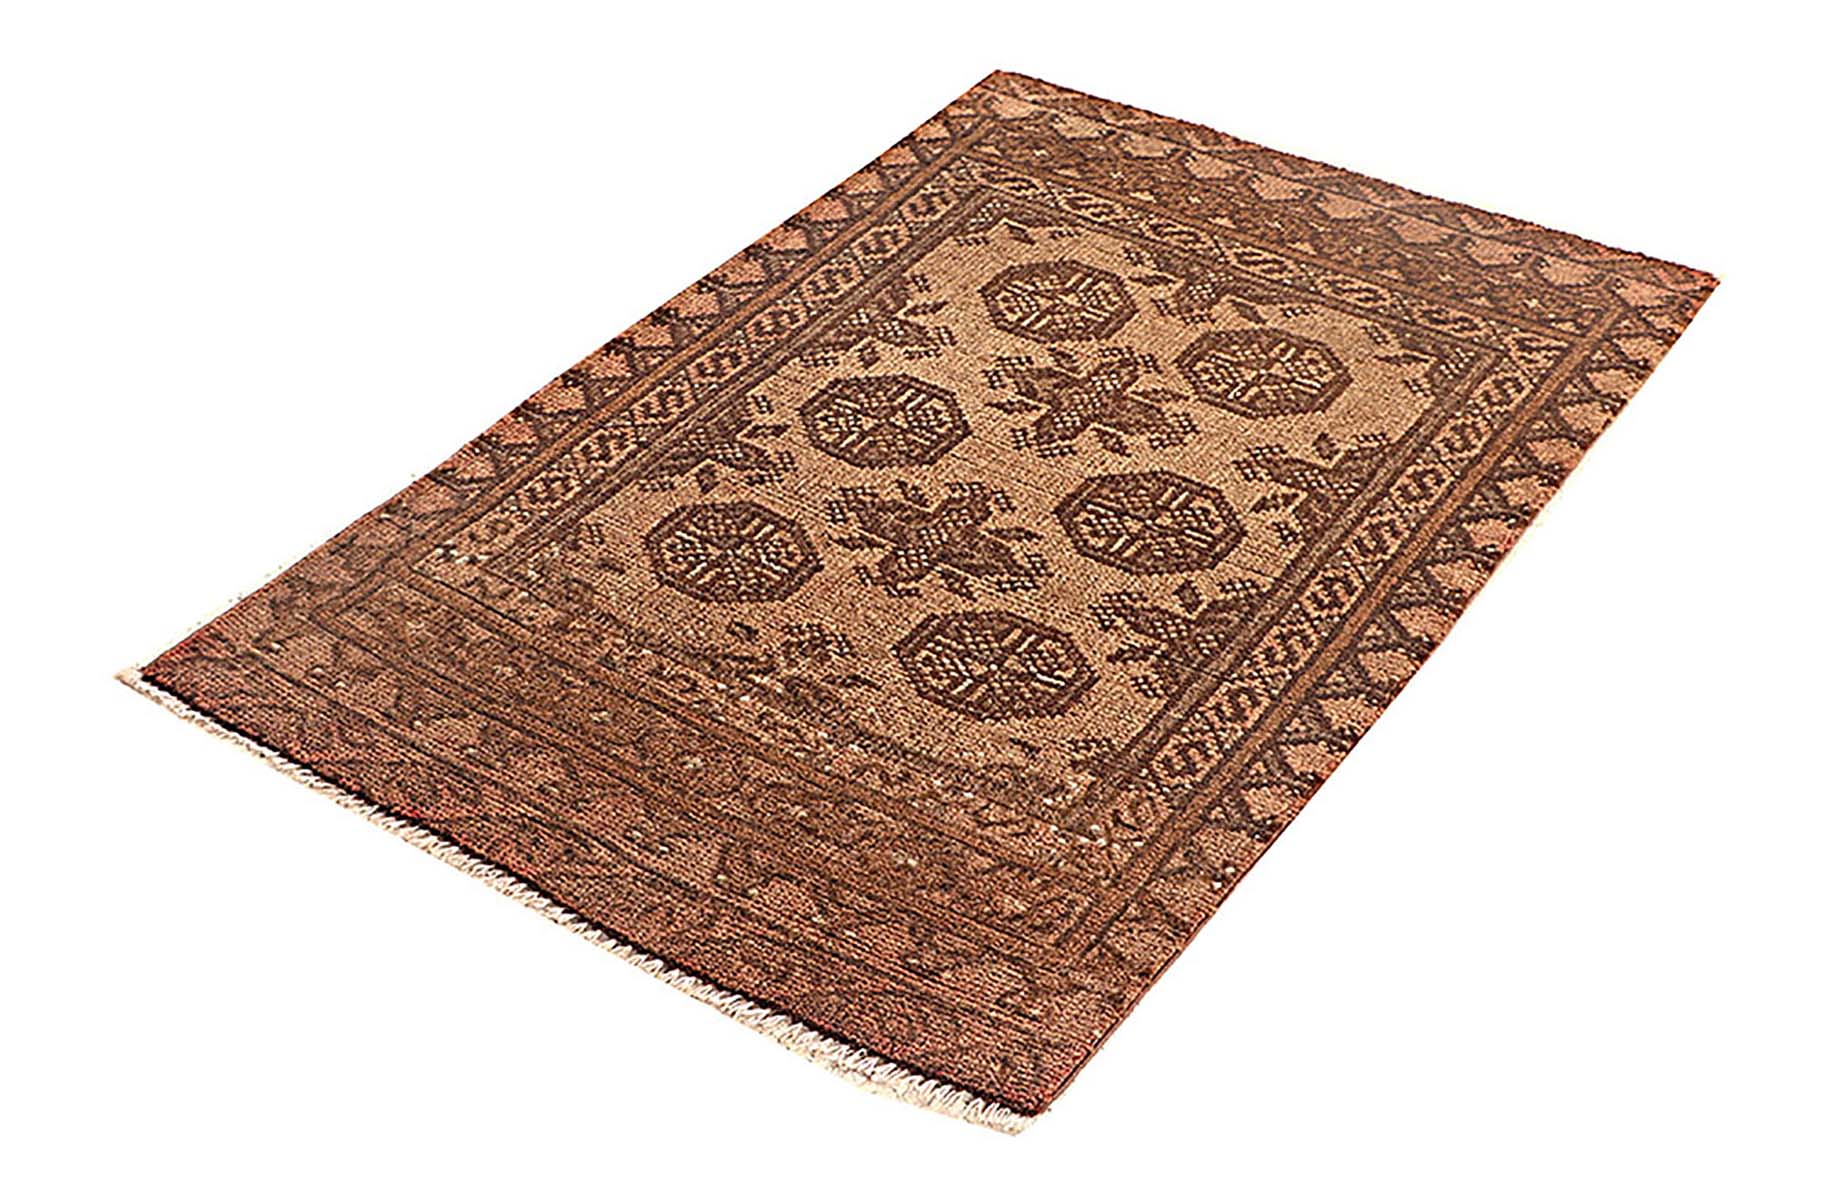 Afghan Aqcha carpet 80 x 120 hand-knotted brown geometric Orient short pile j 